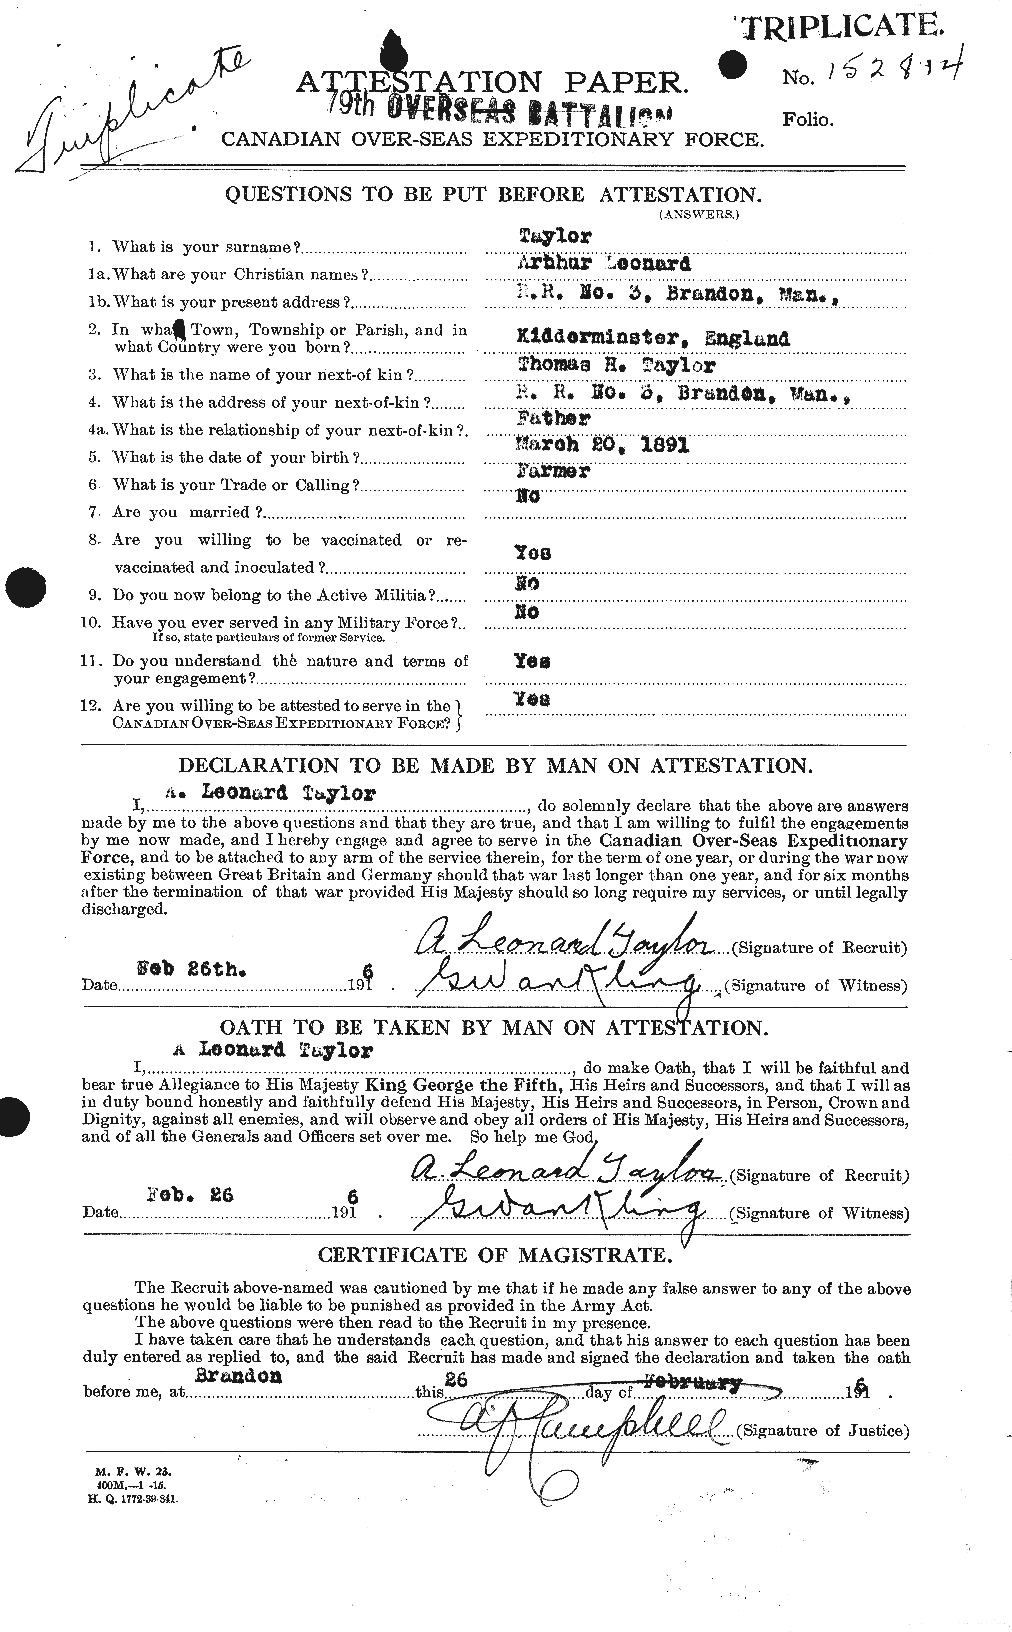 Personnel Records of the First World War - CEF 626736a